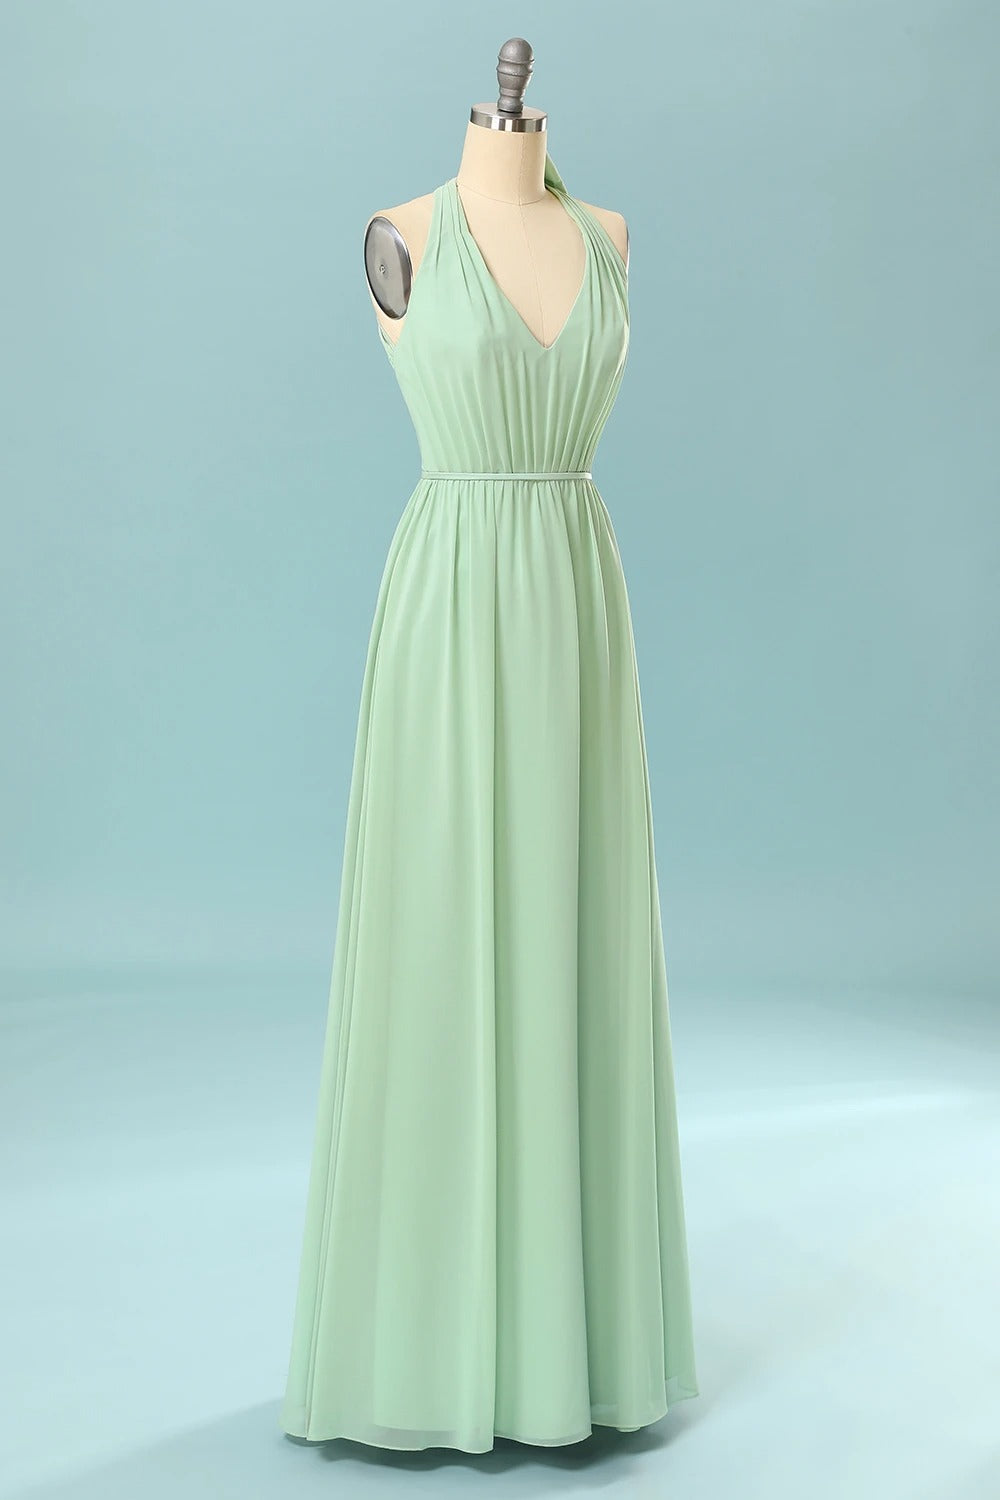 Halter Mint Green Bridesmaid Dress with Bowknot